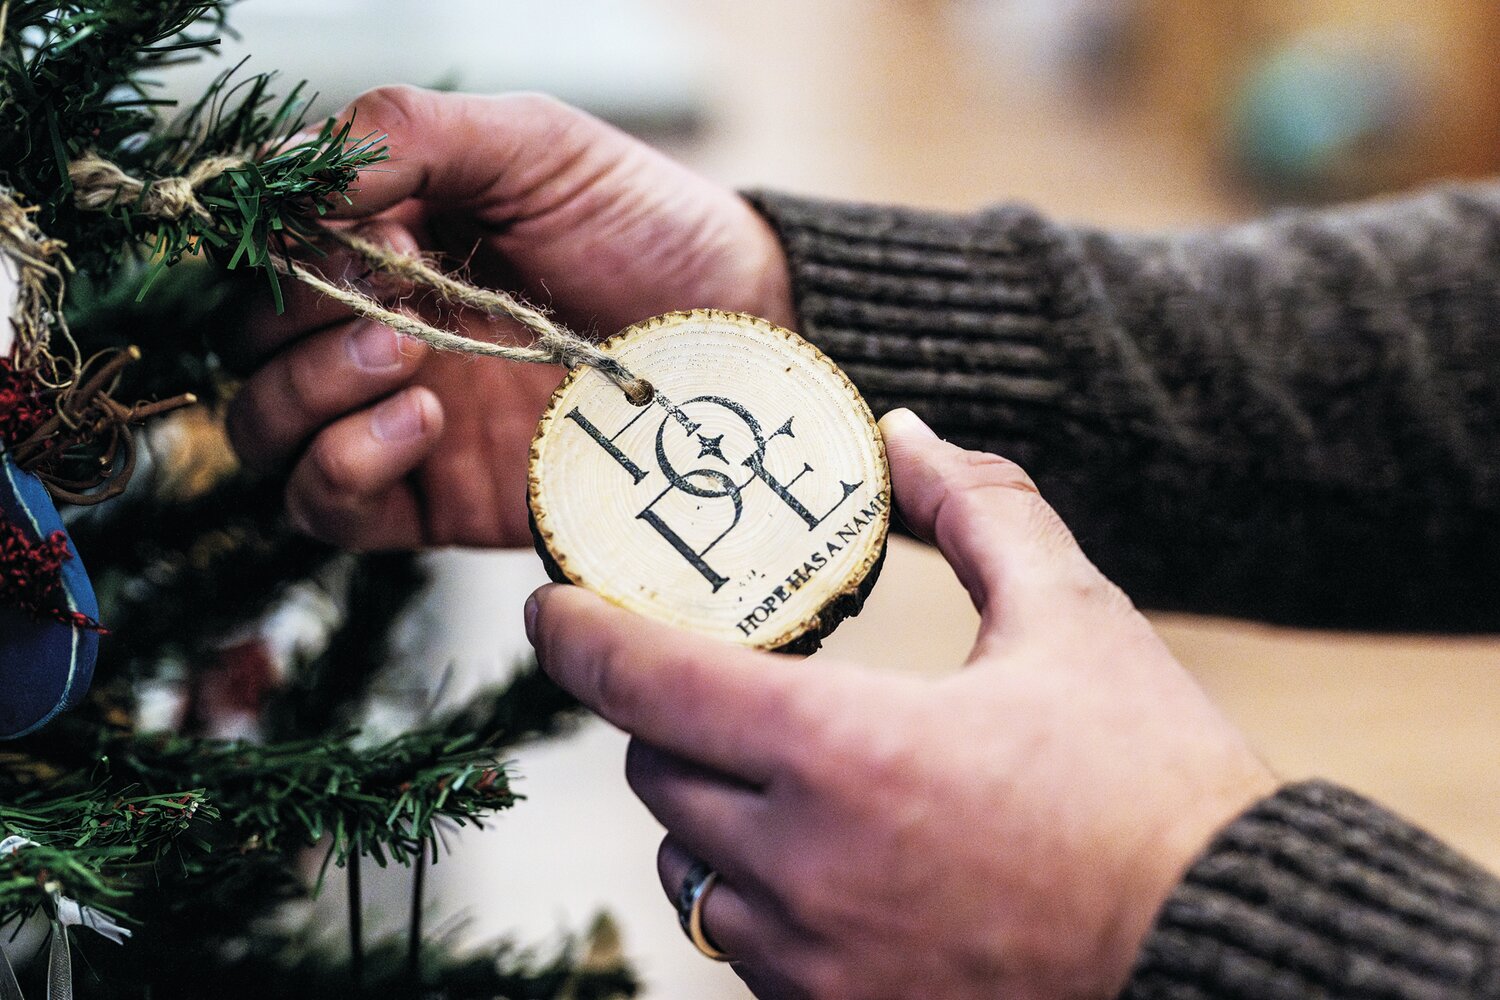 An ornament that reads “Hope” hangs on a Christmas tree at Worthwhile Thrift. That’s what the nonprofit working to end modern day slavery tries to offer to women who are recovering from human trafficking.